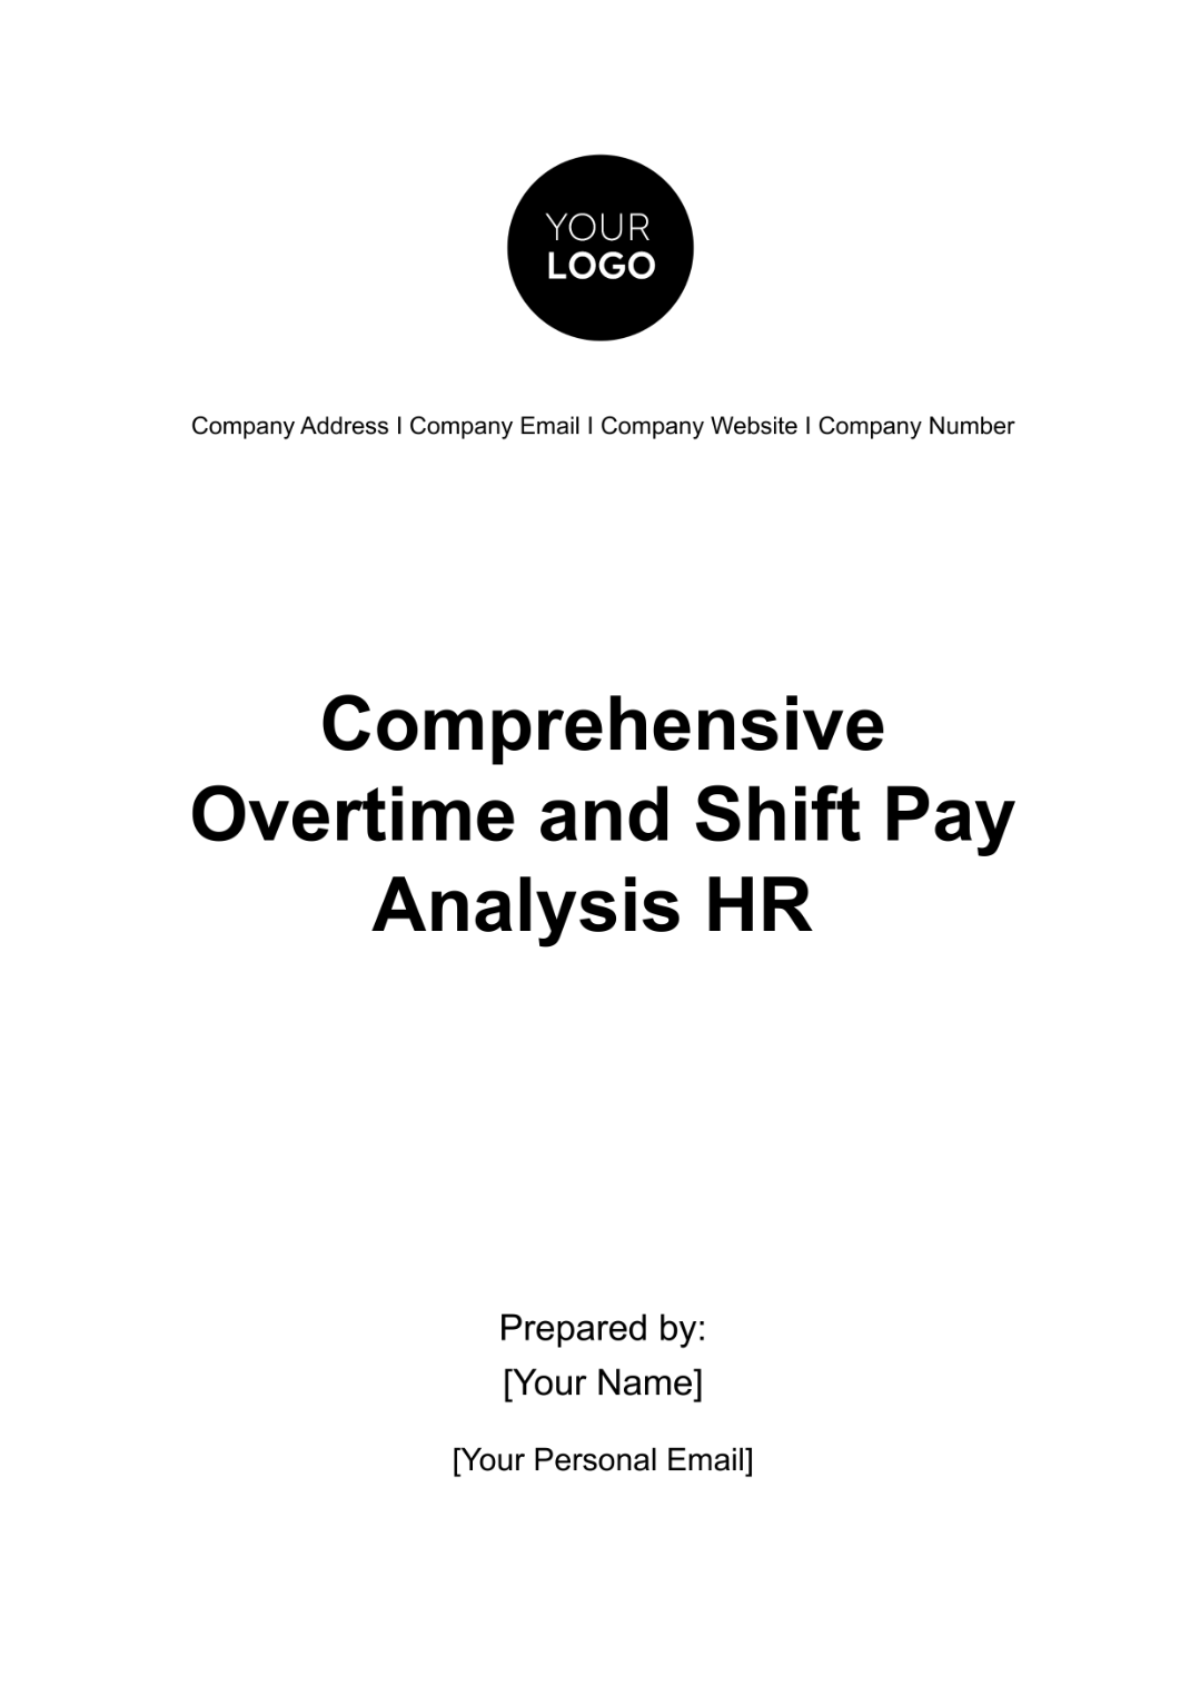 Free Comprehensive Overtime and Shift Pay Analysis HR Template